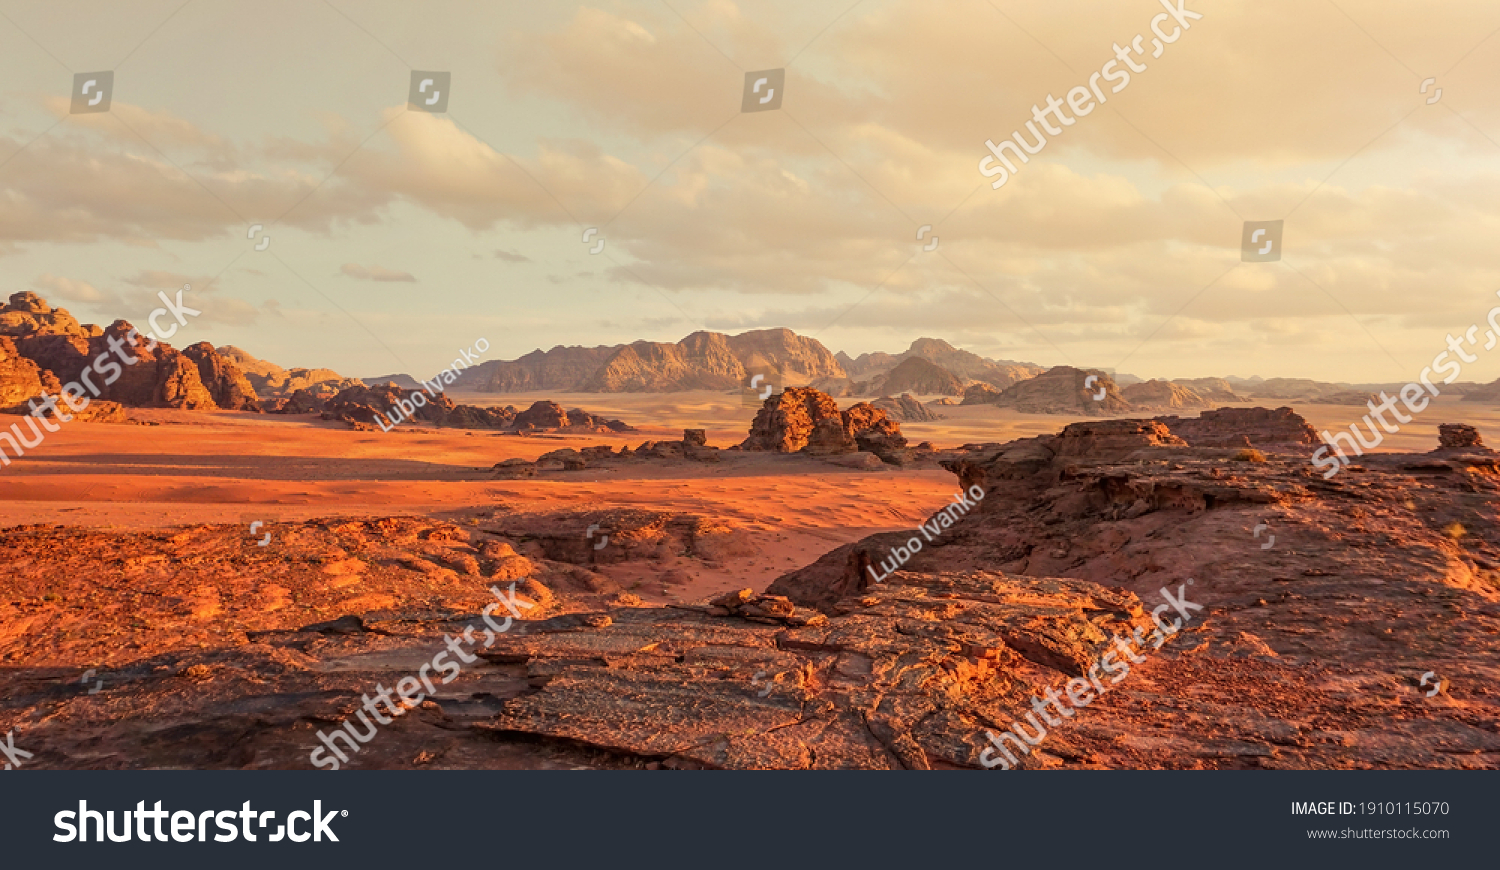 Red Mars like landscape in Wadi Rum desert, Jordan, this location was used as set for many science fiction movies #1910115070